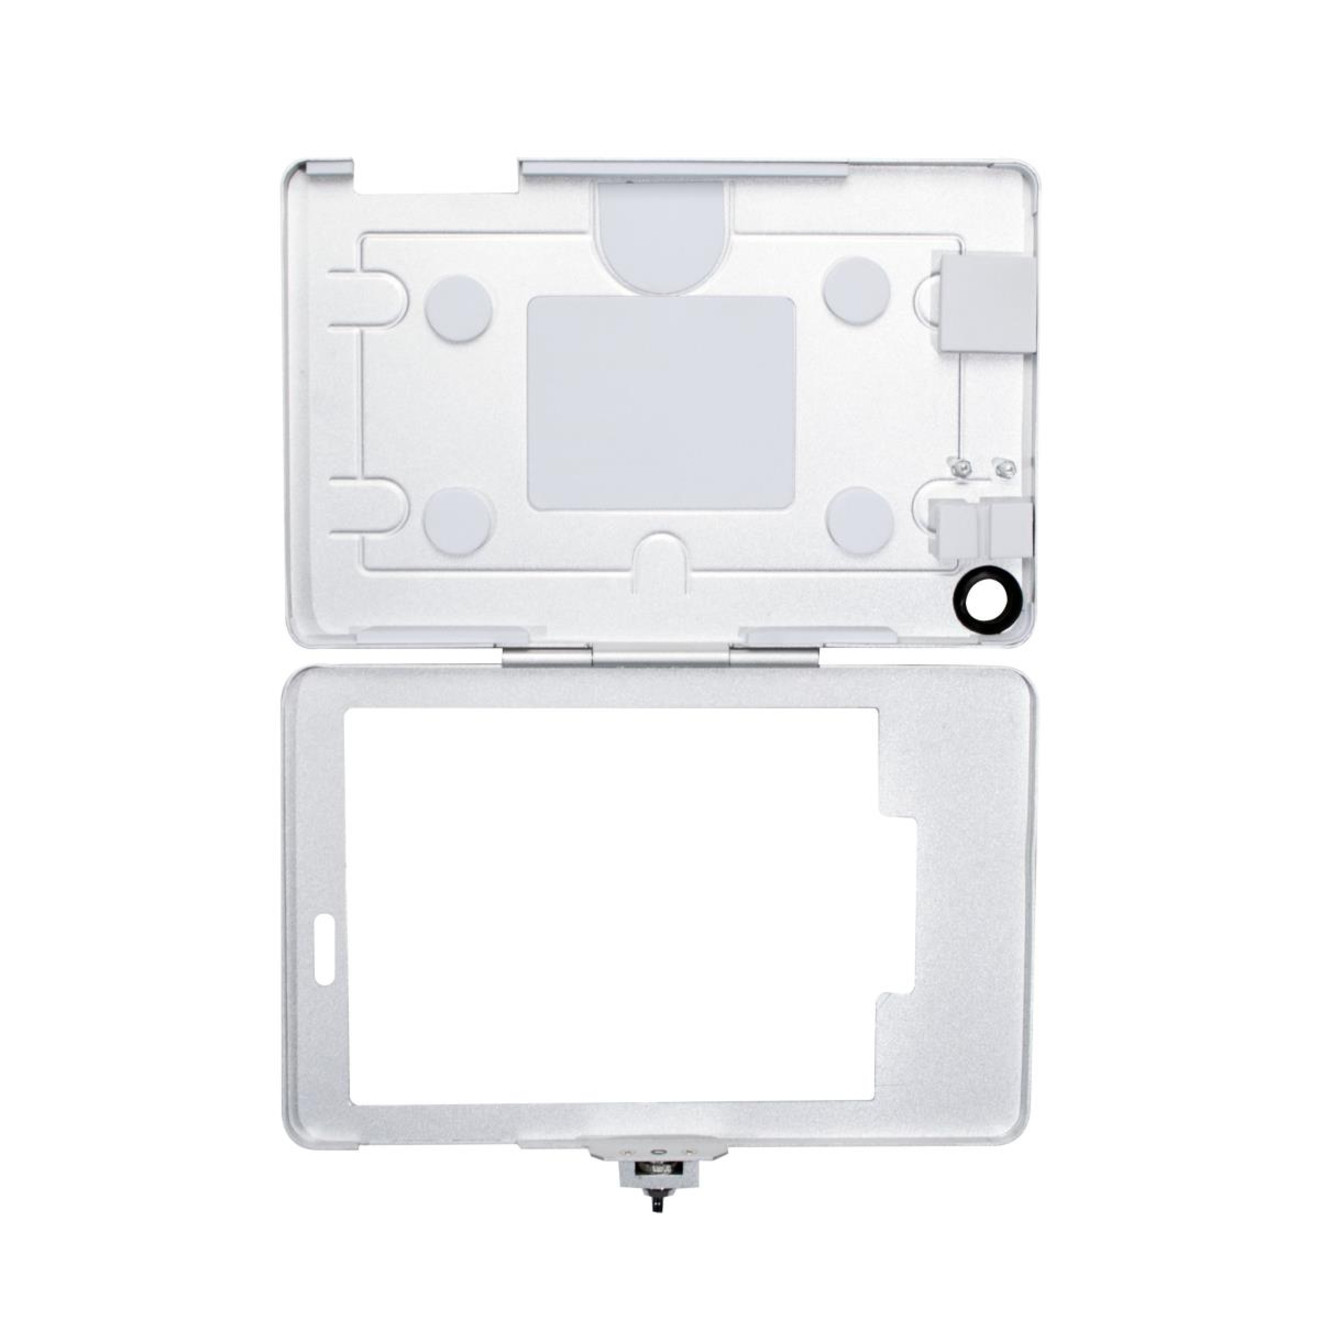 Cta Accessories Security Wall Enclosure Galaxy Tabs /S2/S3 9.7In9.7" Screen Support1 PAD-SWEG - Corporate Armor